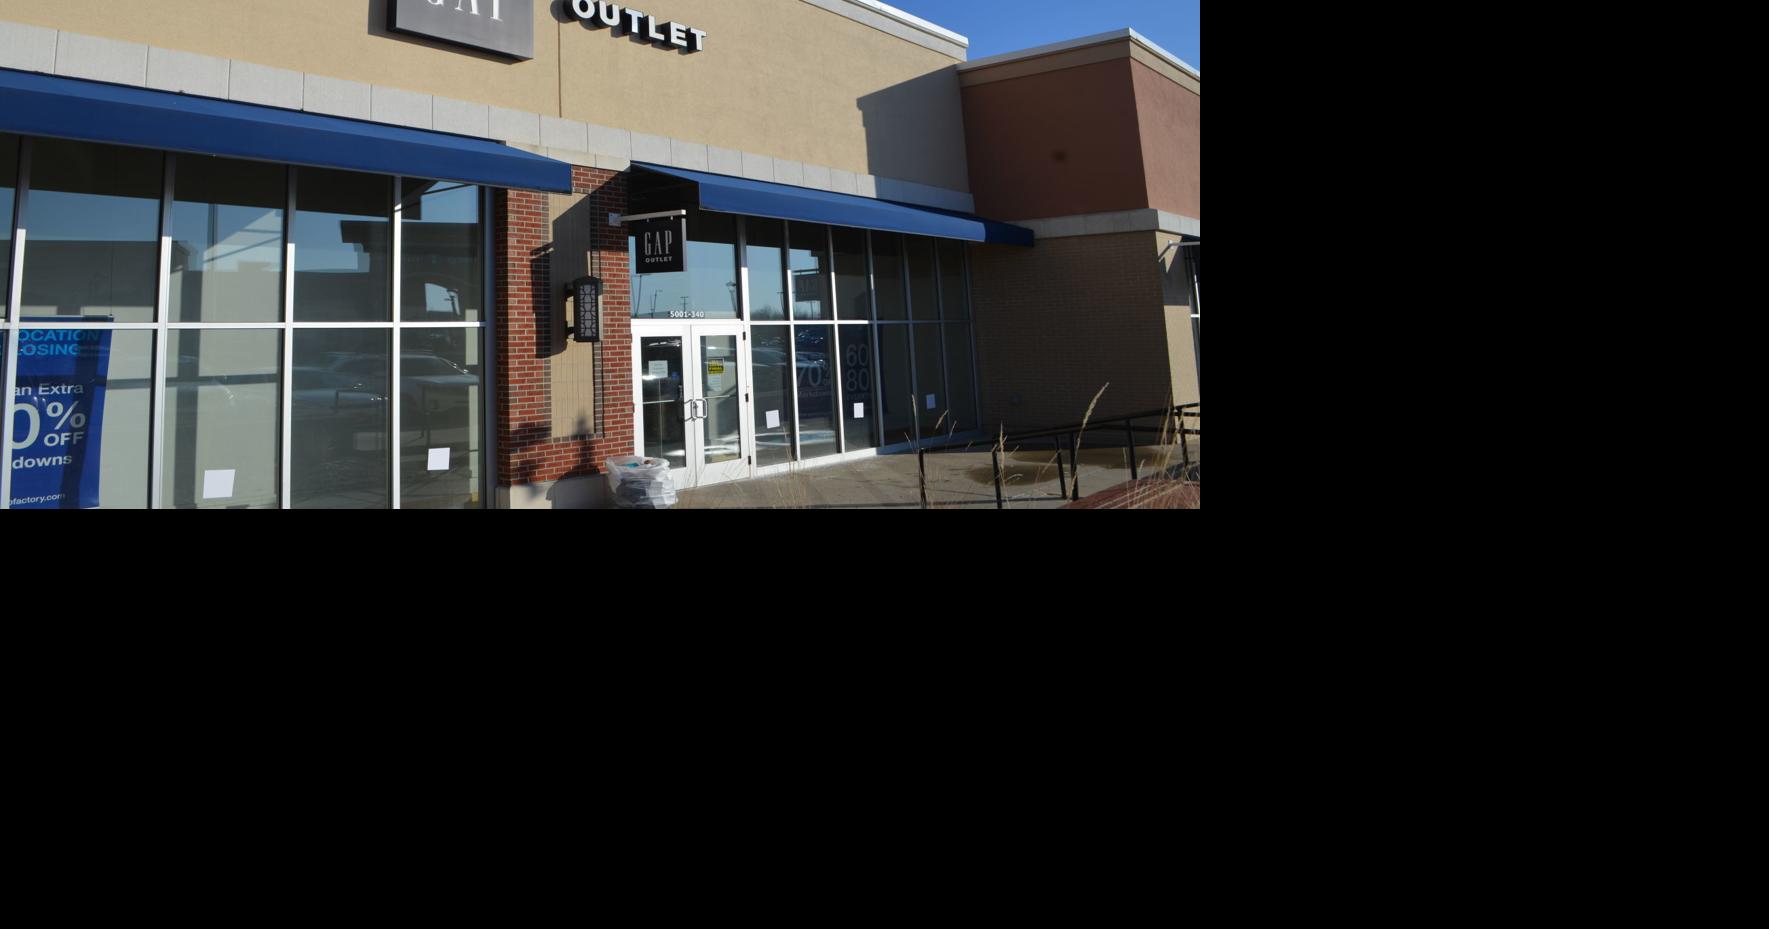 Tuesday Morning closing its Sioux Falls store after filing for bankruptcy